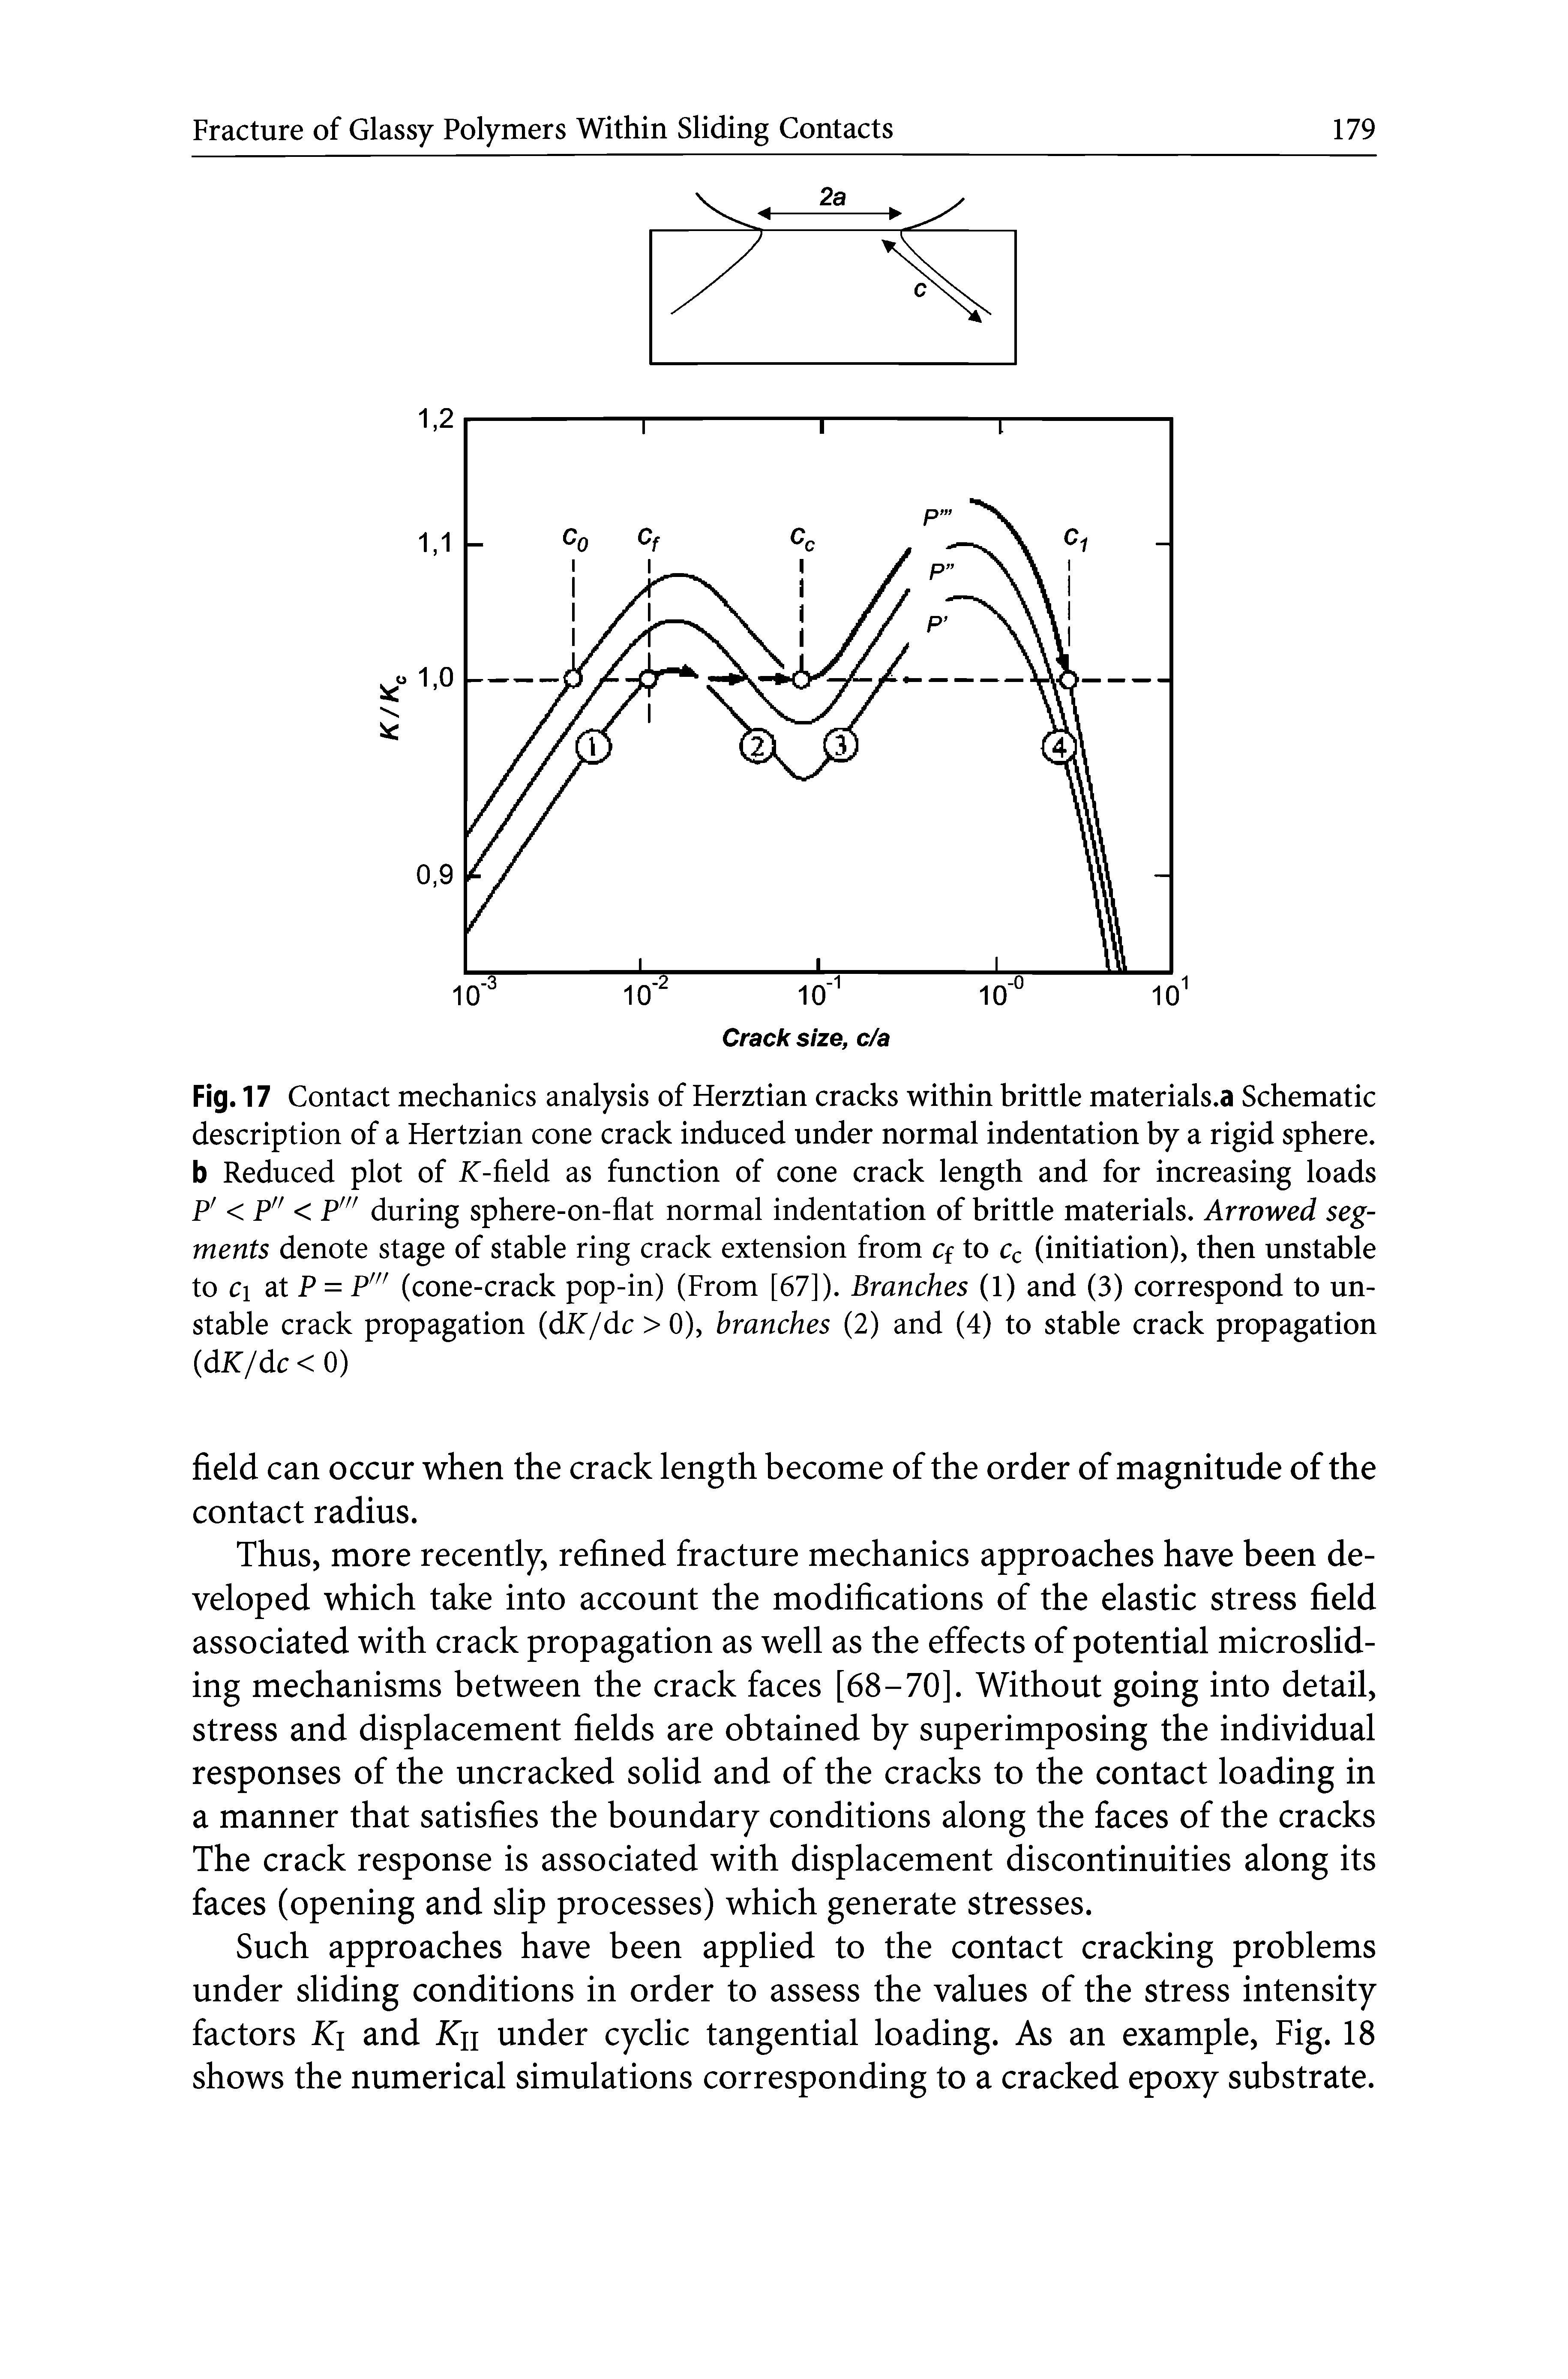 Fig. 17 Contact mechanics analysis of Herztian cracks within brittle materials.a Schematic description of a Hertzian cone crack induced under normal indentation by a rigid sphere, b Reduced plot of JC-field as function of cone crack length and for increasing loads pf < p// < pm during sphere-on-flat normal indentation of brittle materials. Arrowed segments denote stage of stable ring crack extension from Cf to cc (initiation), then unstable to ci at P = P,n (cone-crack pop-in) (From [67]). Branches (1) and (3) correspond to unstable crack propagation (dK/dc > 0), branches (2) and (4) to stable crack propagation (dK/dc < 0)...